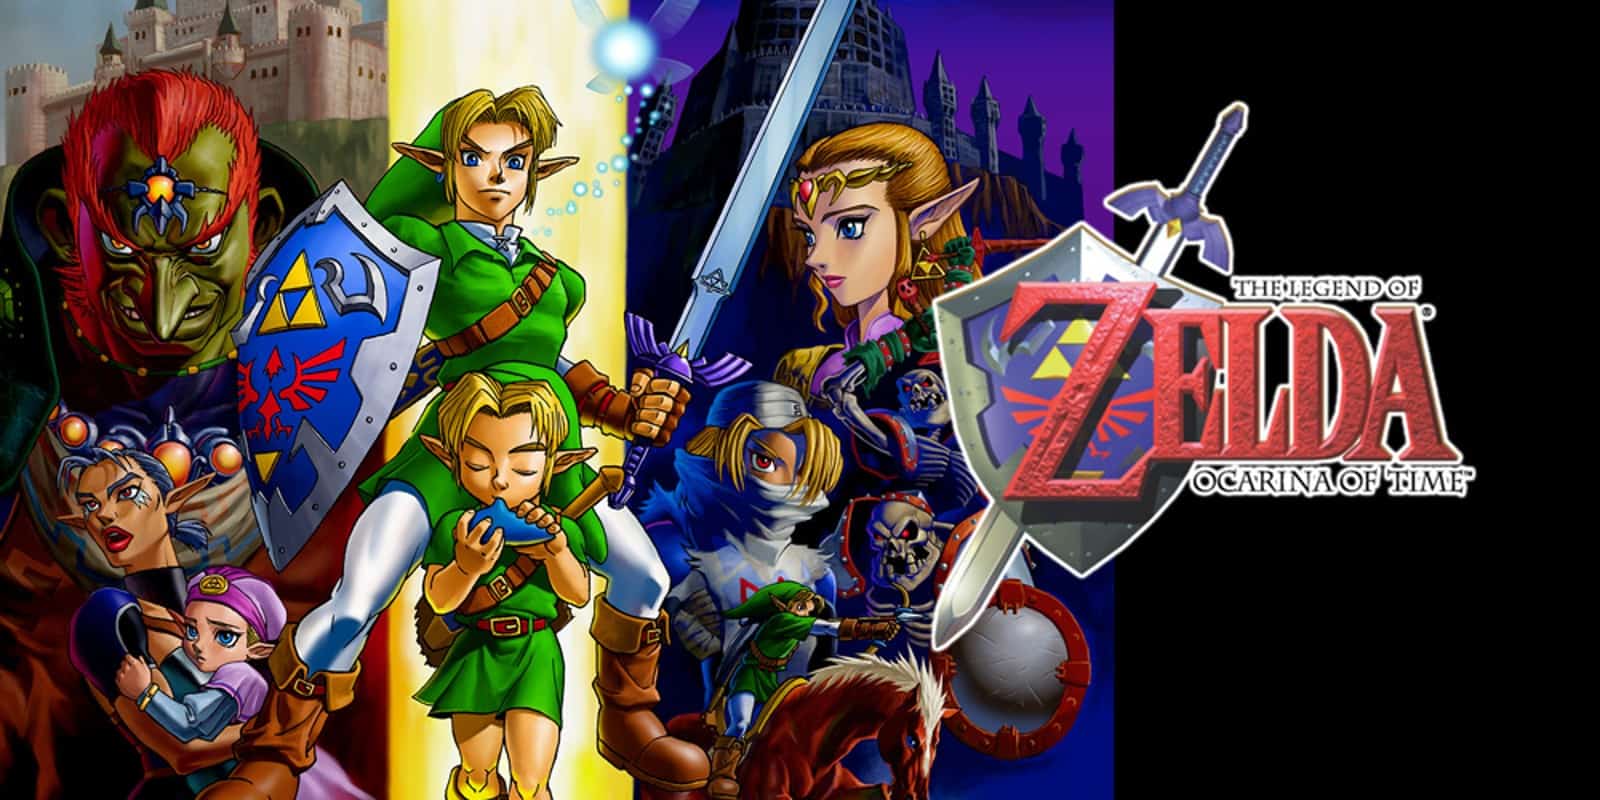 The Legend of Zelda: Ocarina of Time Cheats & Cheat Codes for Nintendo 64 -  Cheat Code Central